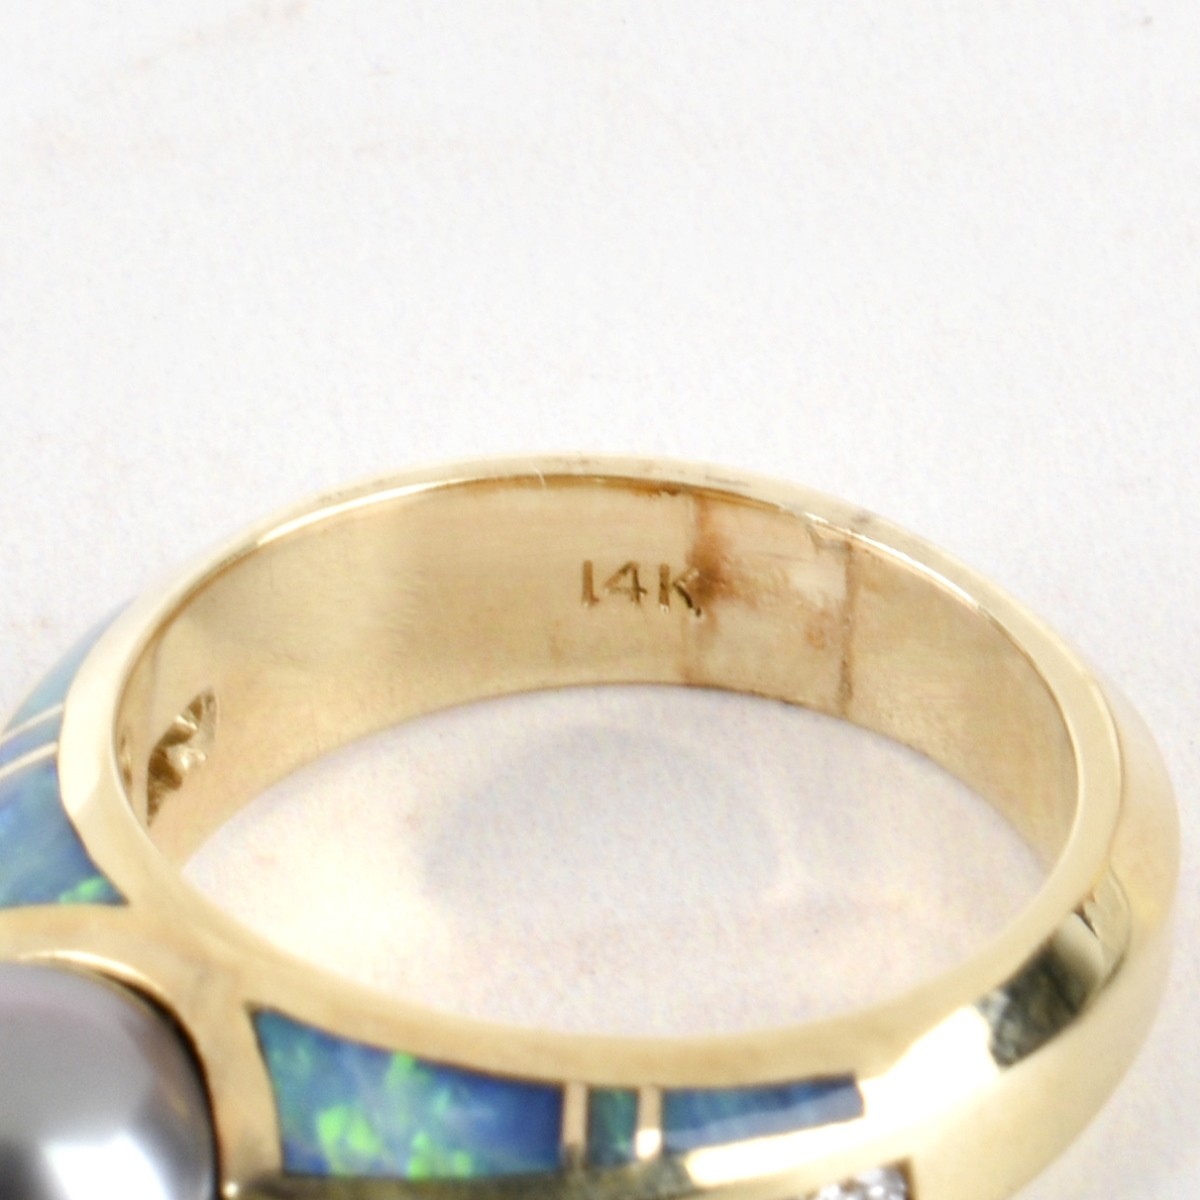 Diamond, Pearl, Opal and 14K Ring